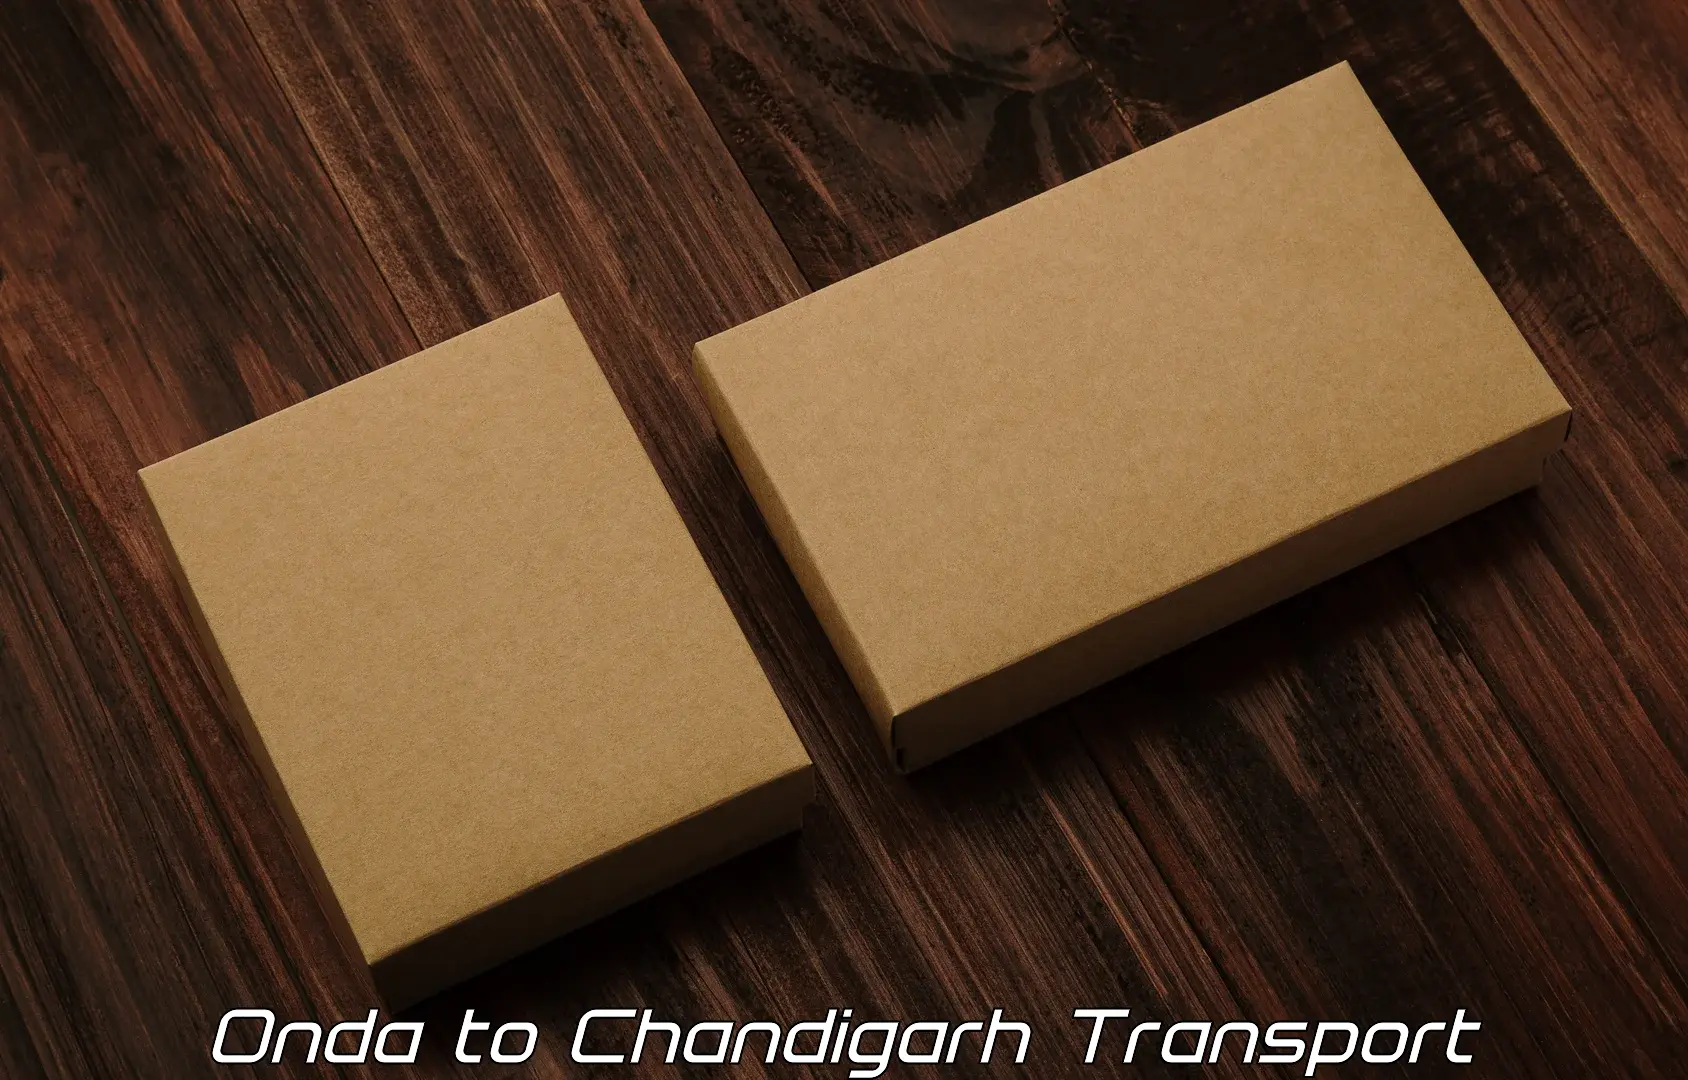 Transport bike from one state to another in Onda to Chandigarh